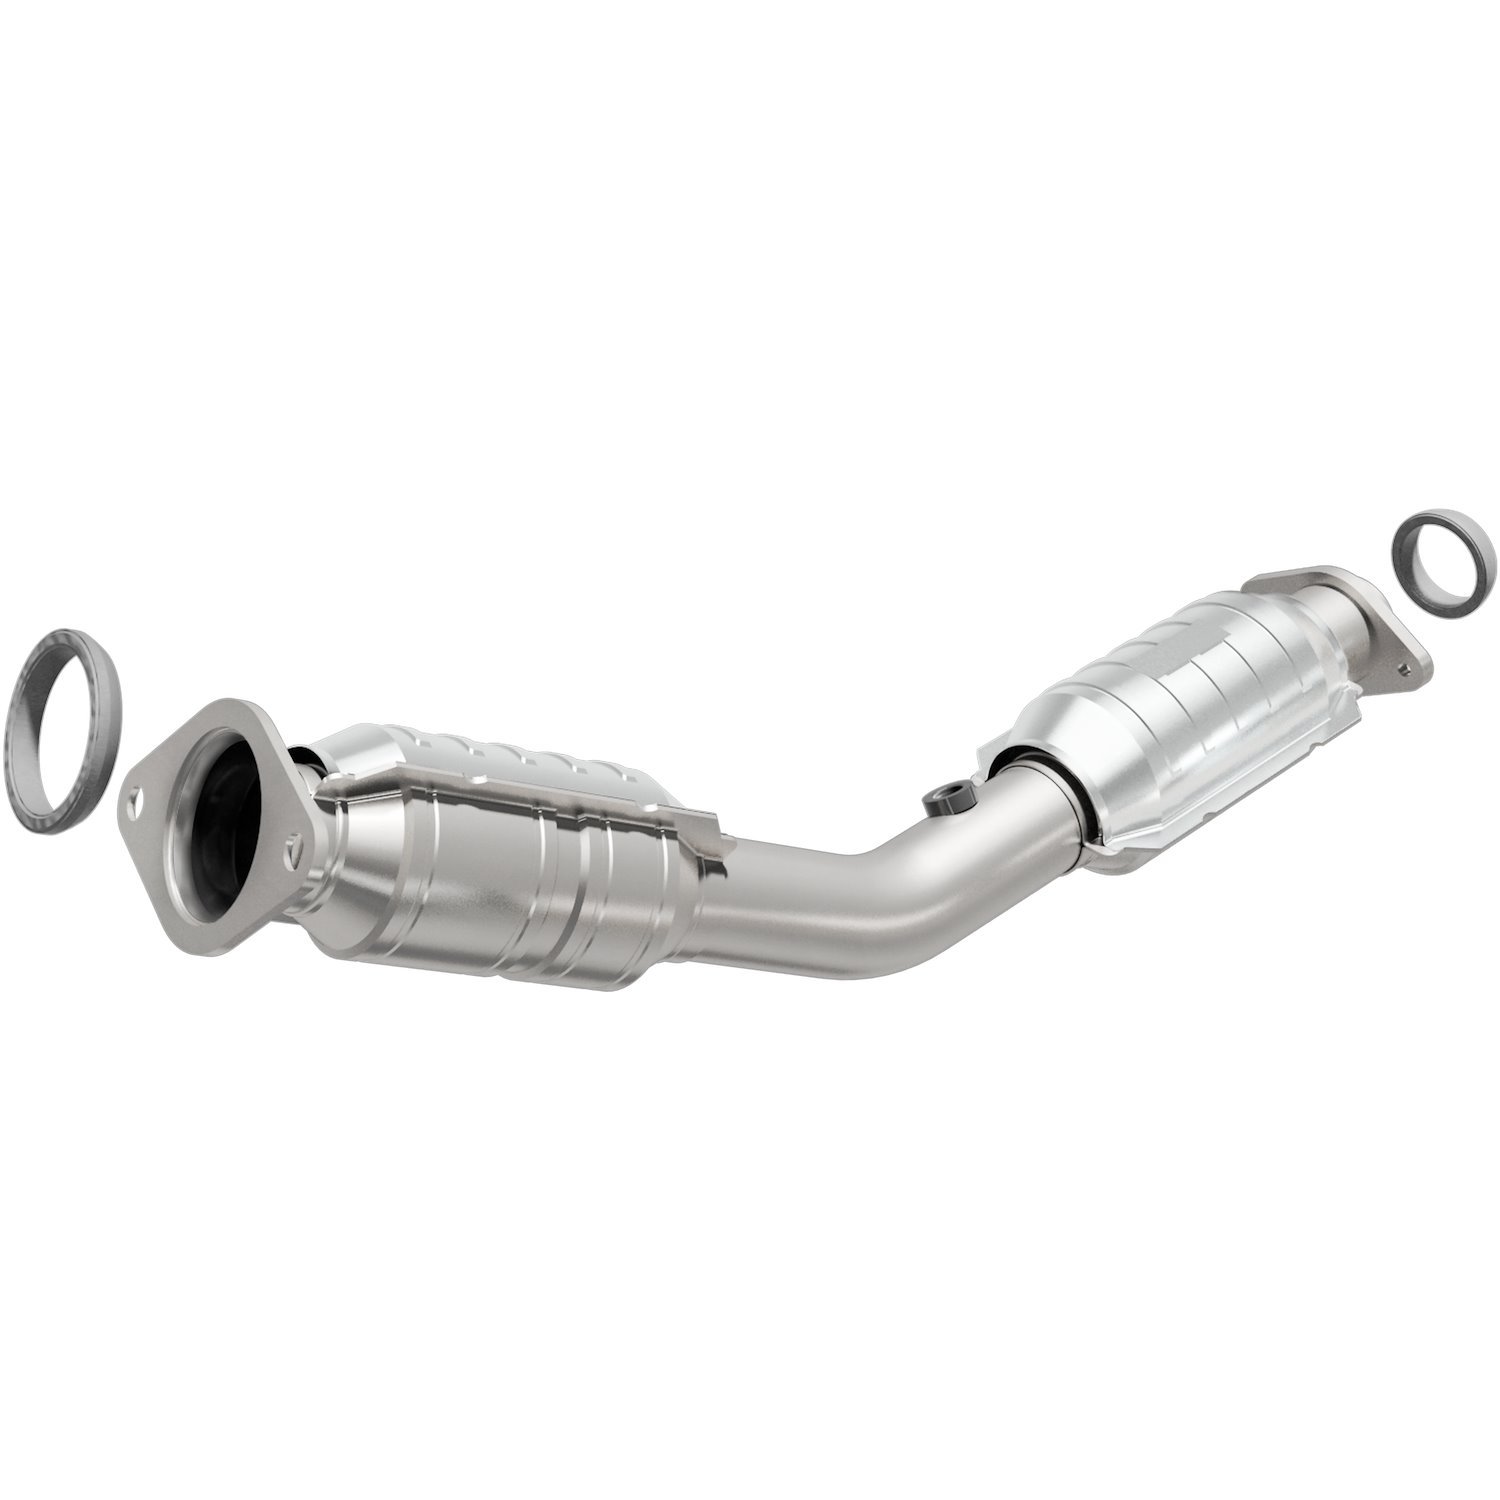 California Grade CARB Compliant Direct-Fit Catalytic Converter 551753